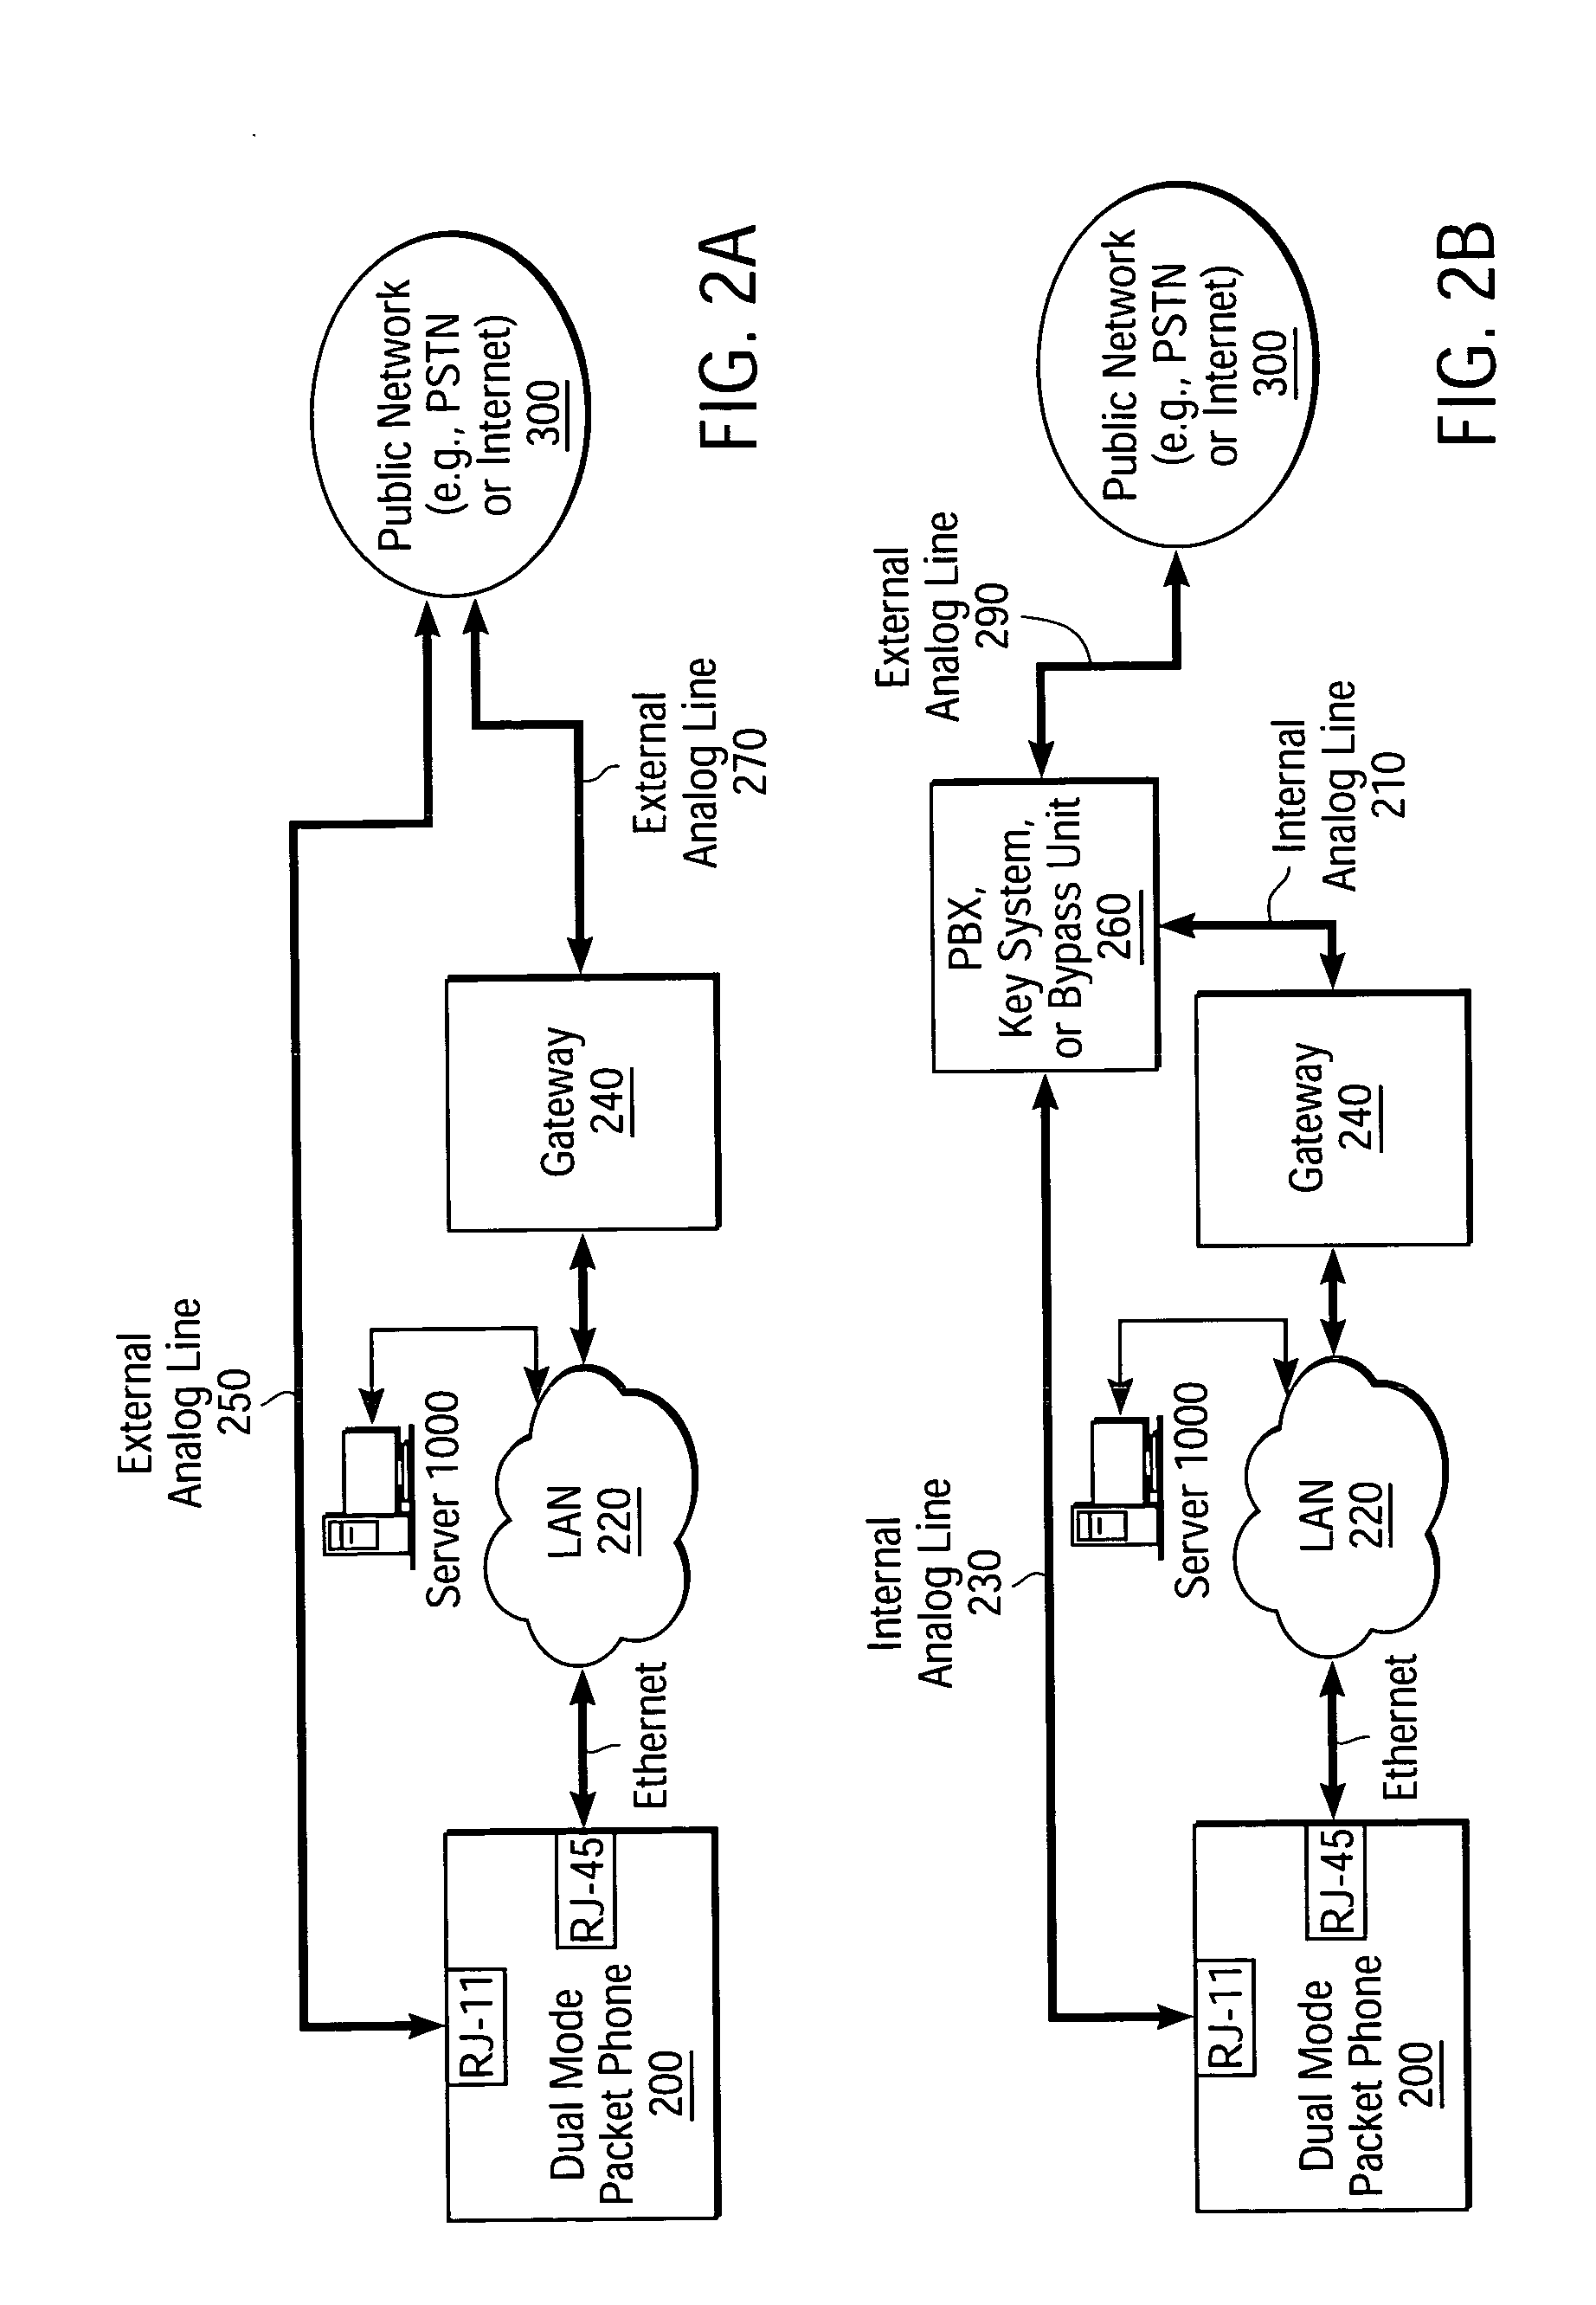 Apparatus and method for dual mode phone